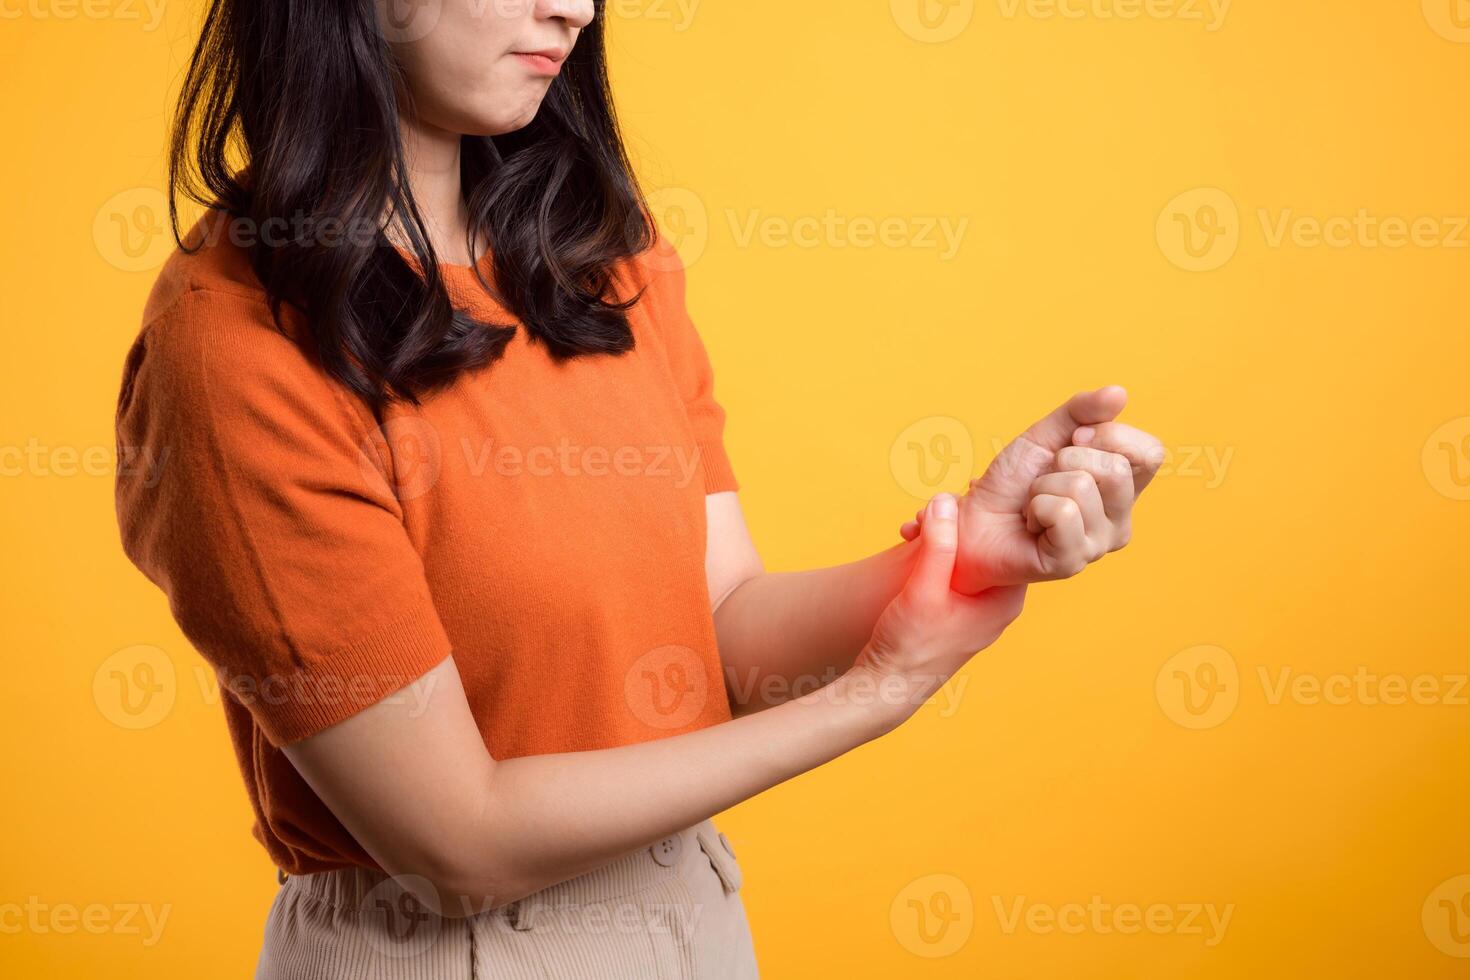 Portrait of a person dealing with wrist discomfort, showcasing arthritis pain. Illustrating body ache and health issue. photo